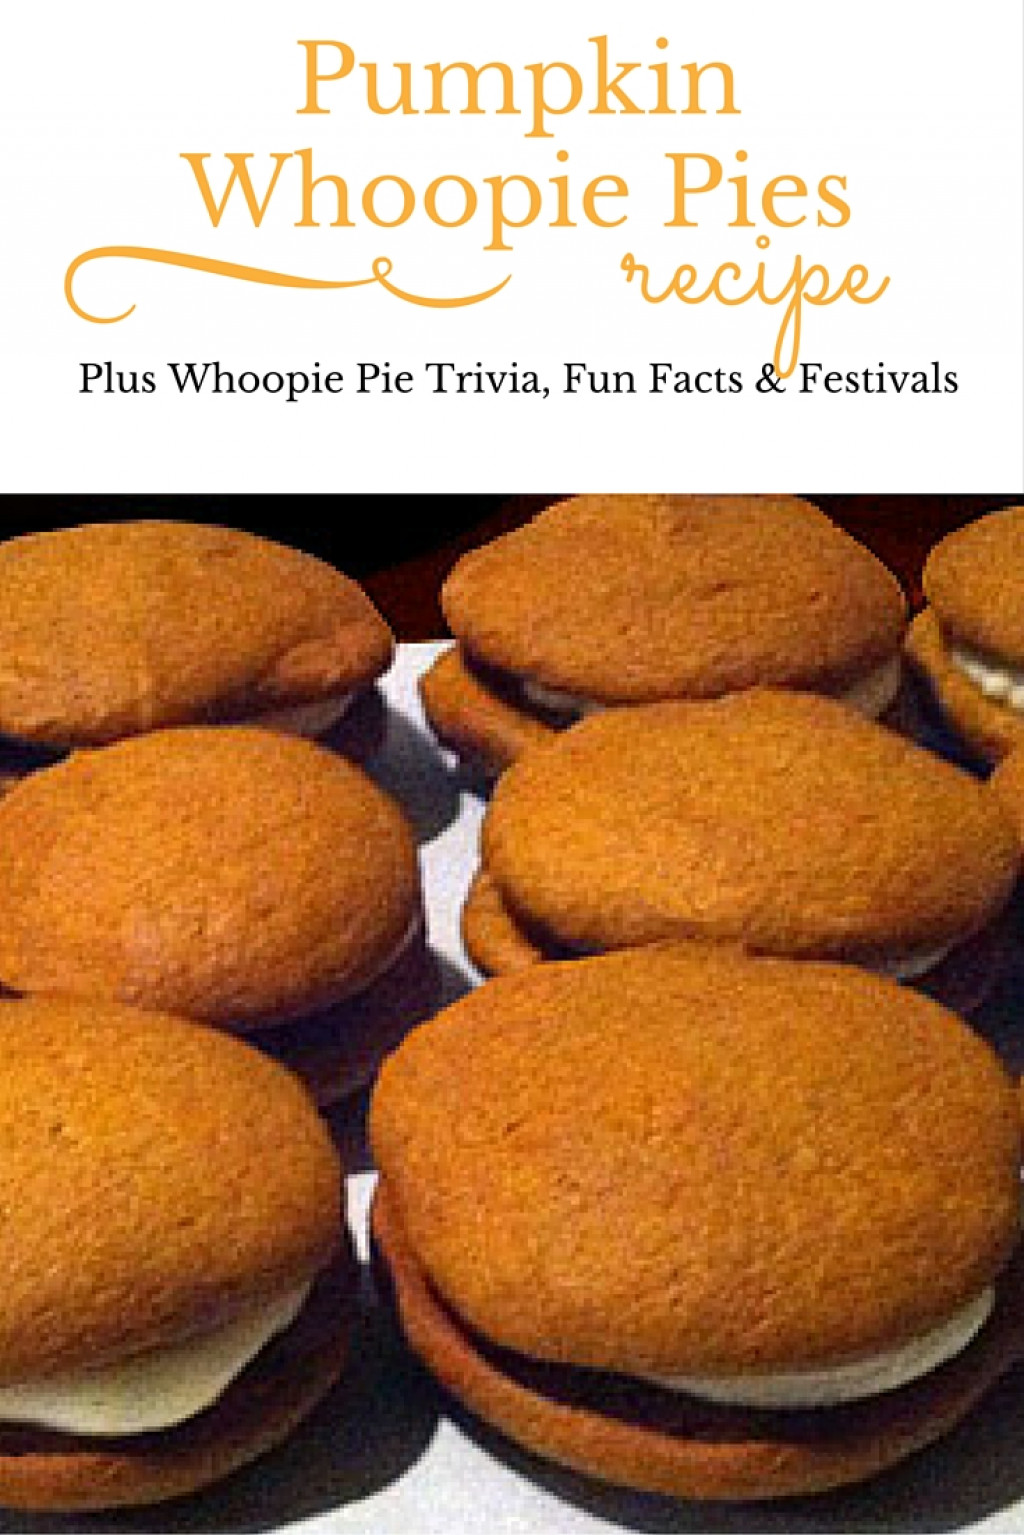 Pumpkin Whoopie Pies Recipe from the Owner of the Famous Wicked